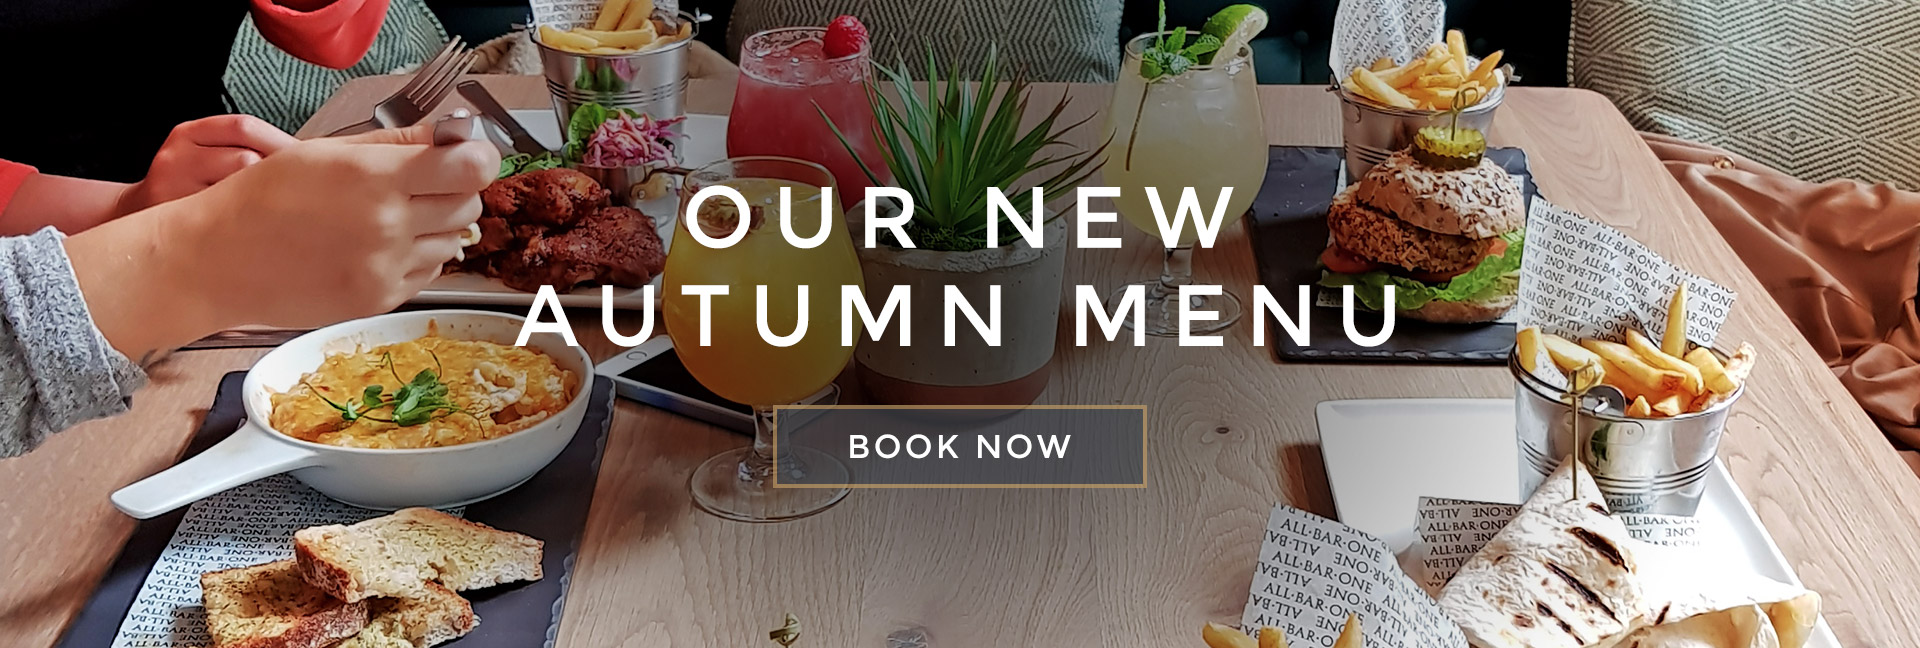 Our new Autumn menu at All Bar One Tower of London - Book now